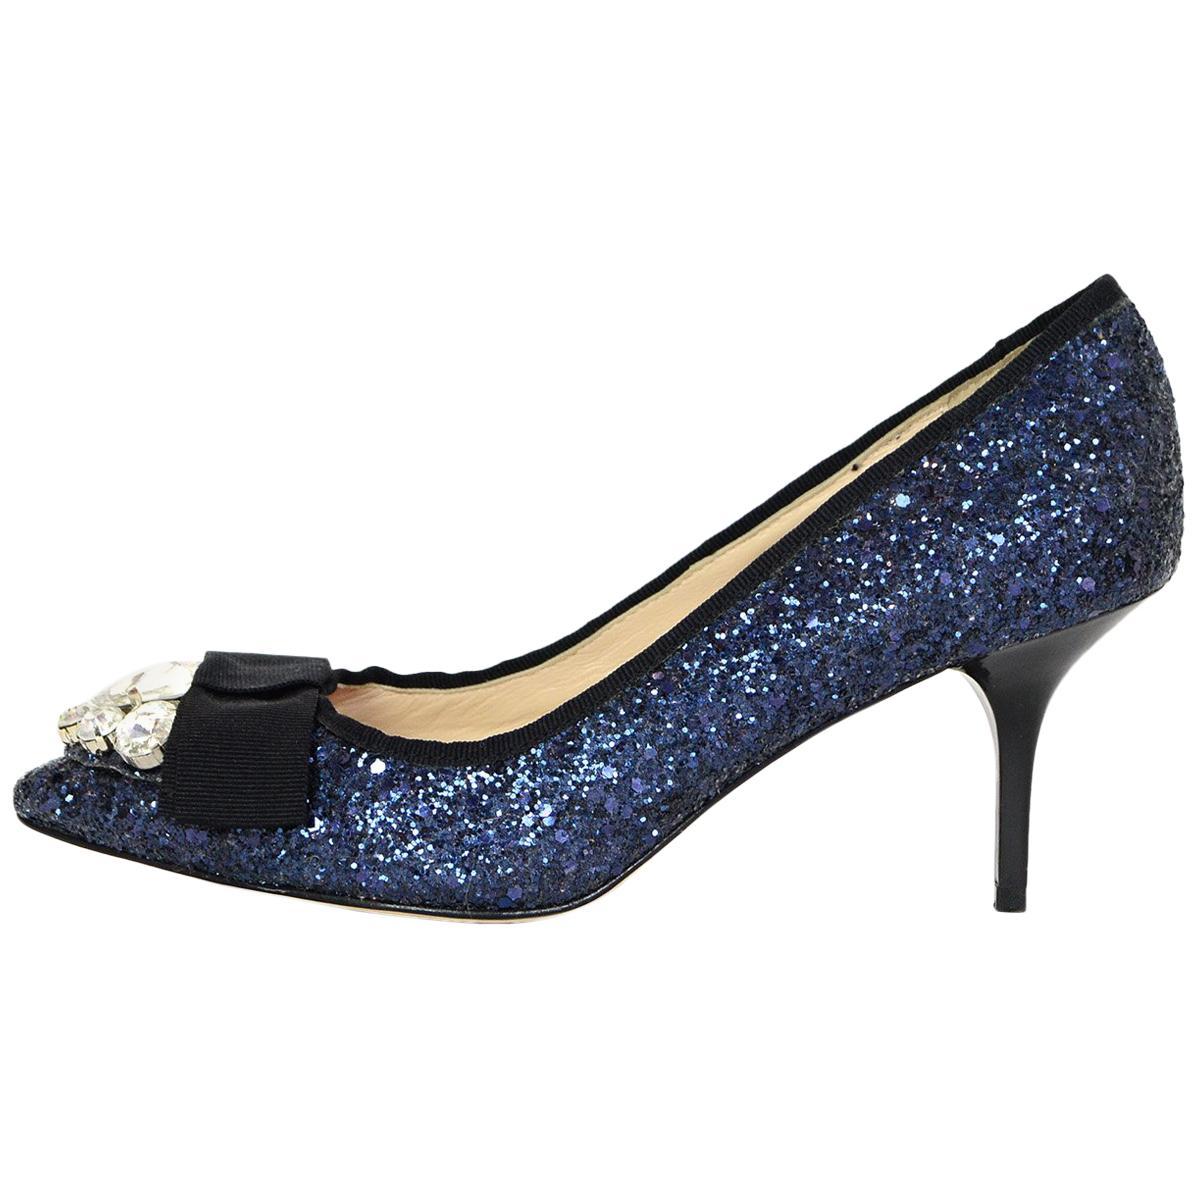 Lucy Choi Royal Navy Blue Glitter Pointed Toe Pumps W/ Bow & Crystals Sz 6